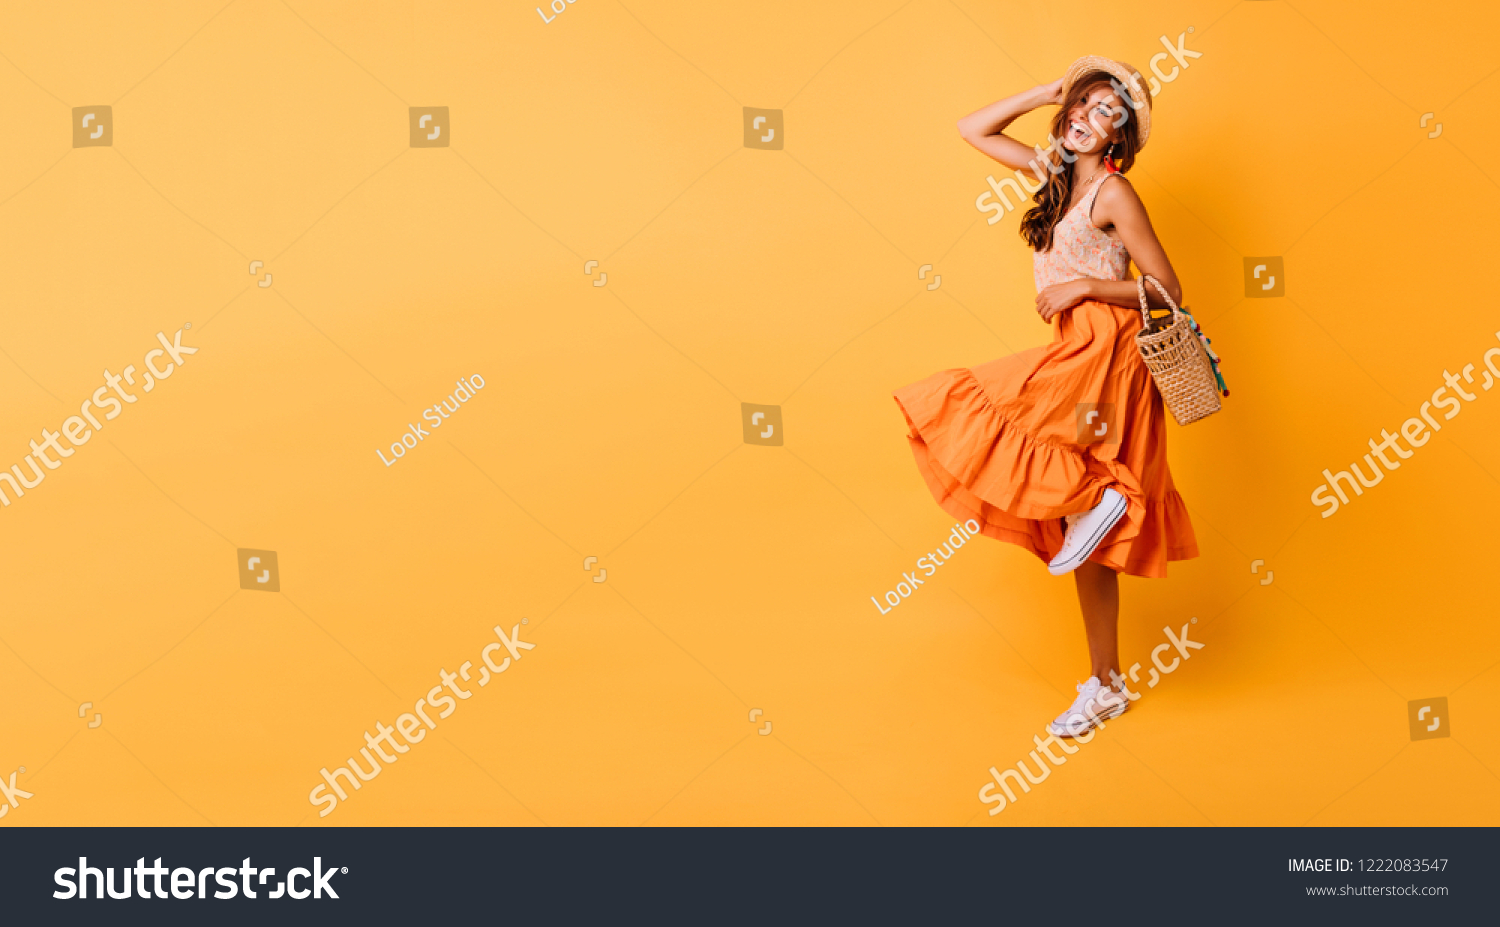 Magnificent woman in long bright skirt dancing in studio. Carefree inspired female model posing with pleasure on yellow background. #1222083547